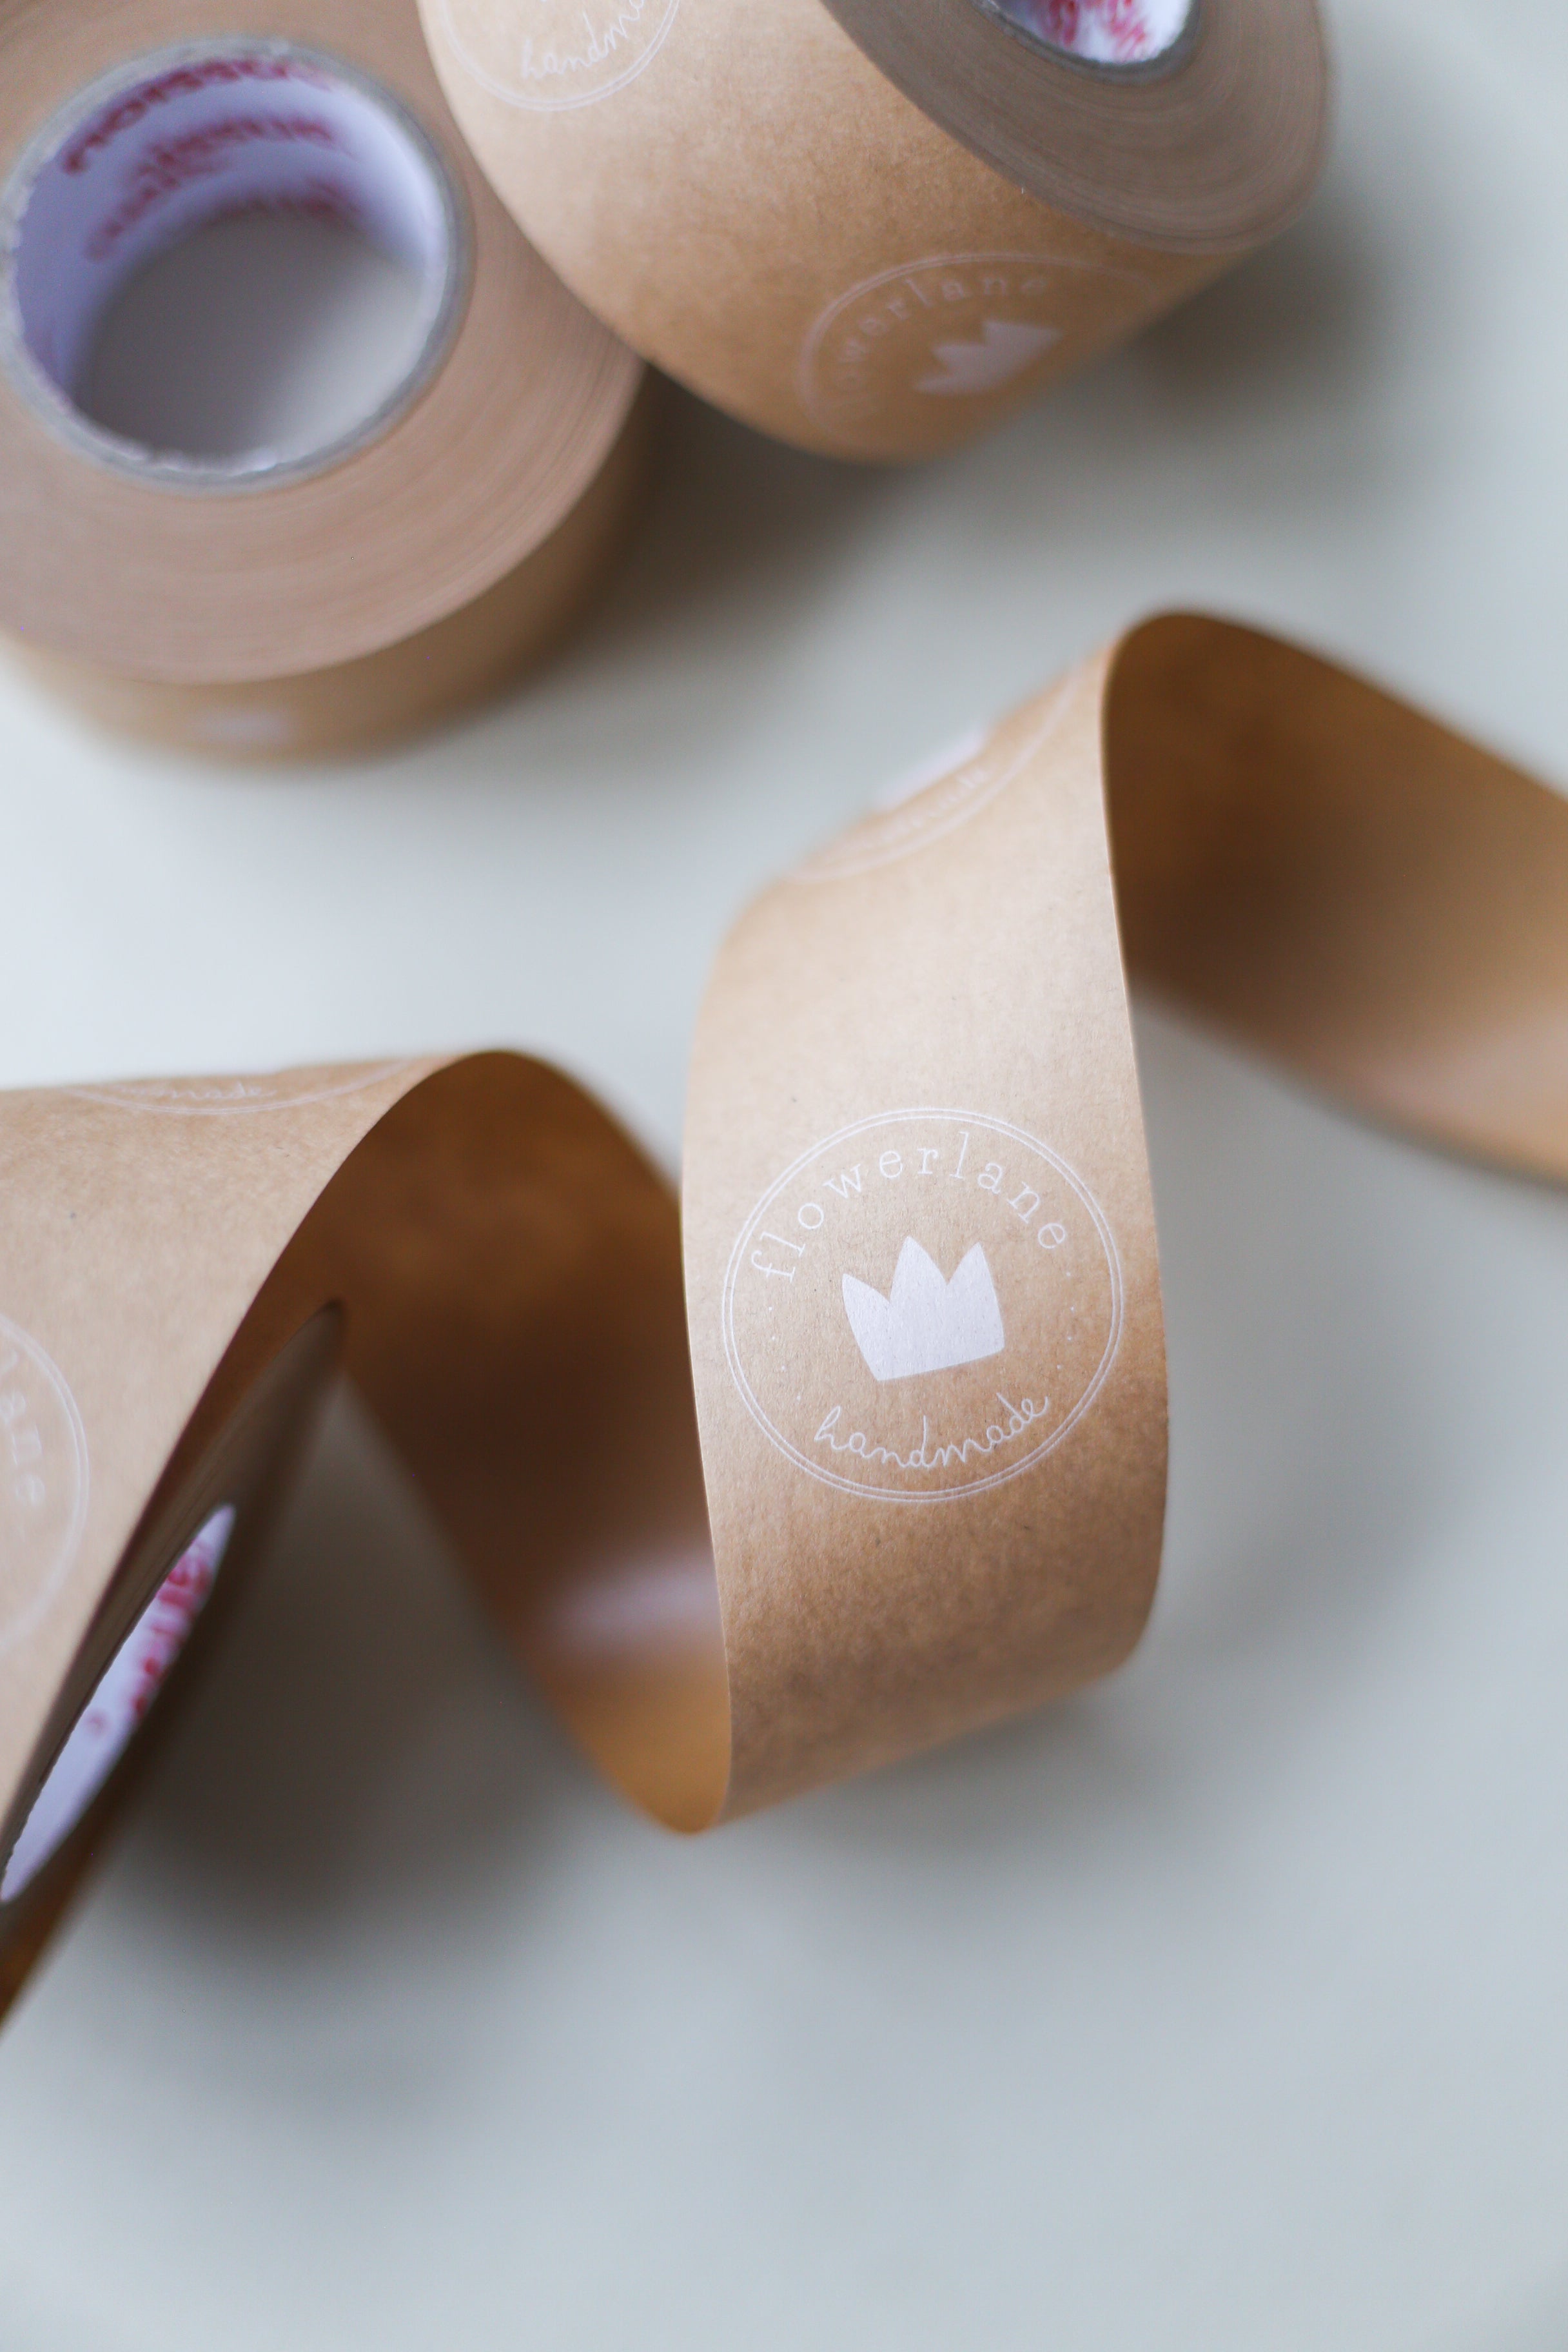 eco-friendly shipping that is recyclable and compostable